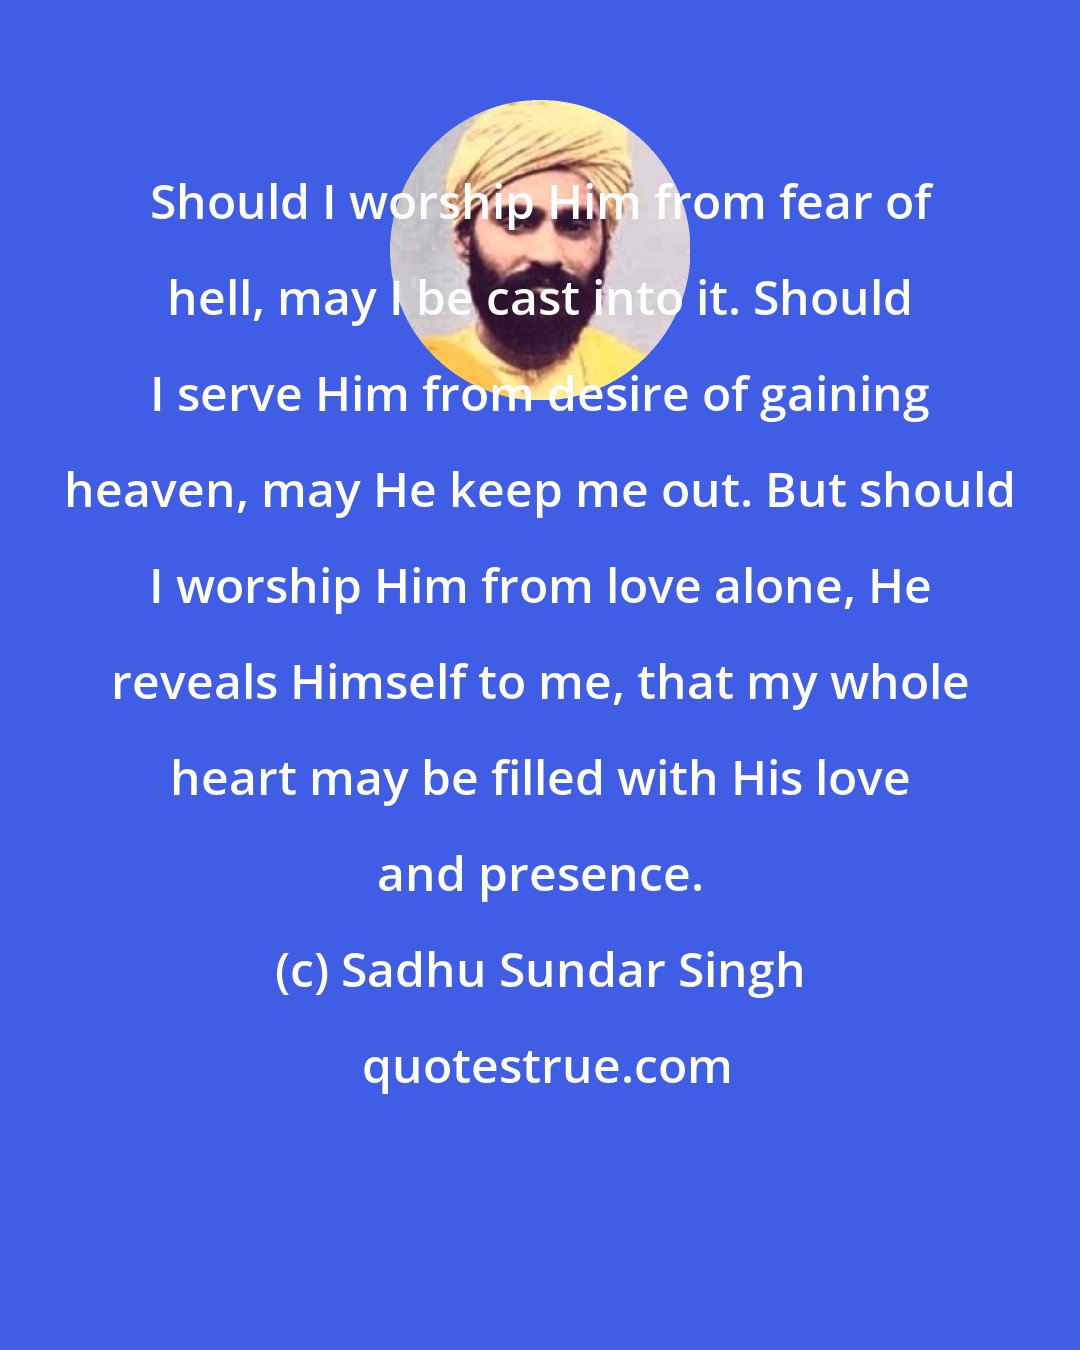 Sadhu Sundar Singh: Should I worship Him from fear of hell, may I be cast into it. Should I serve Him from desire of gaining heaven, may He keep me out. But should I worship Him from love alone, He reveals Himself to me, that my whole heart may be filled with His love and presence.